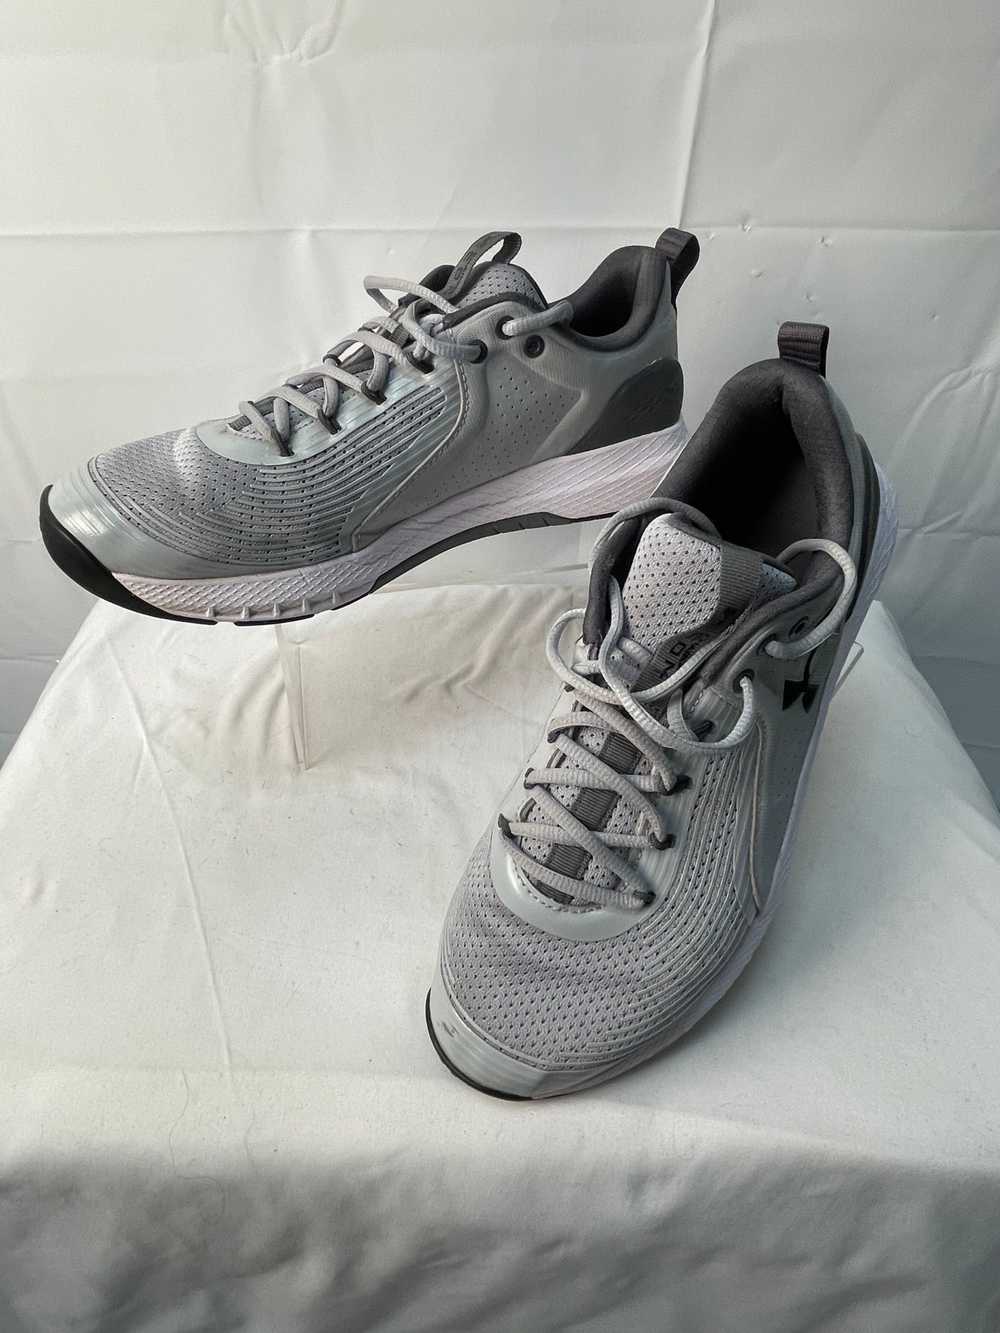 Under Armour Mens Gray Tennis Sneakers Size 11 - image 4